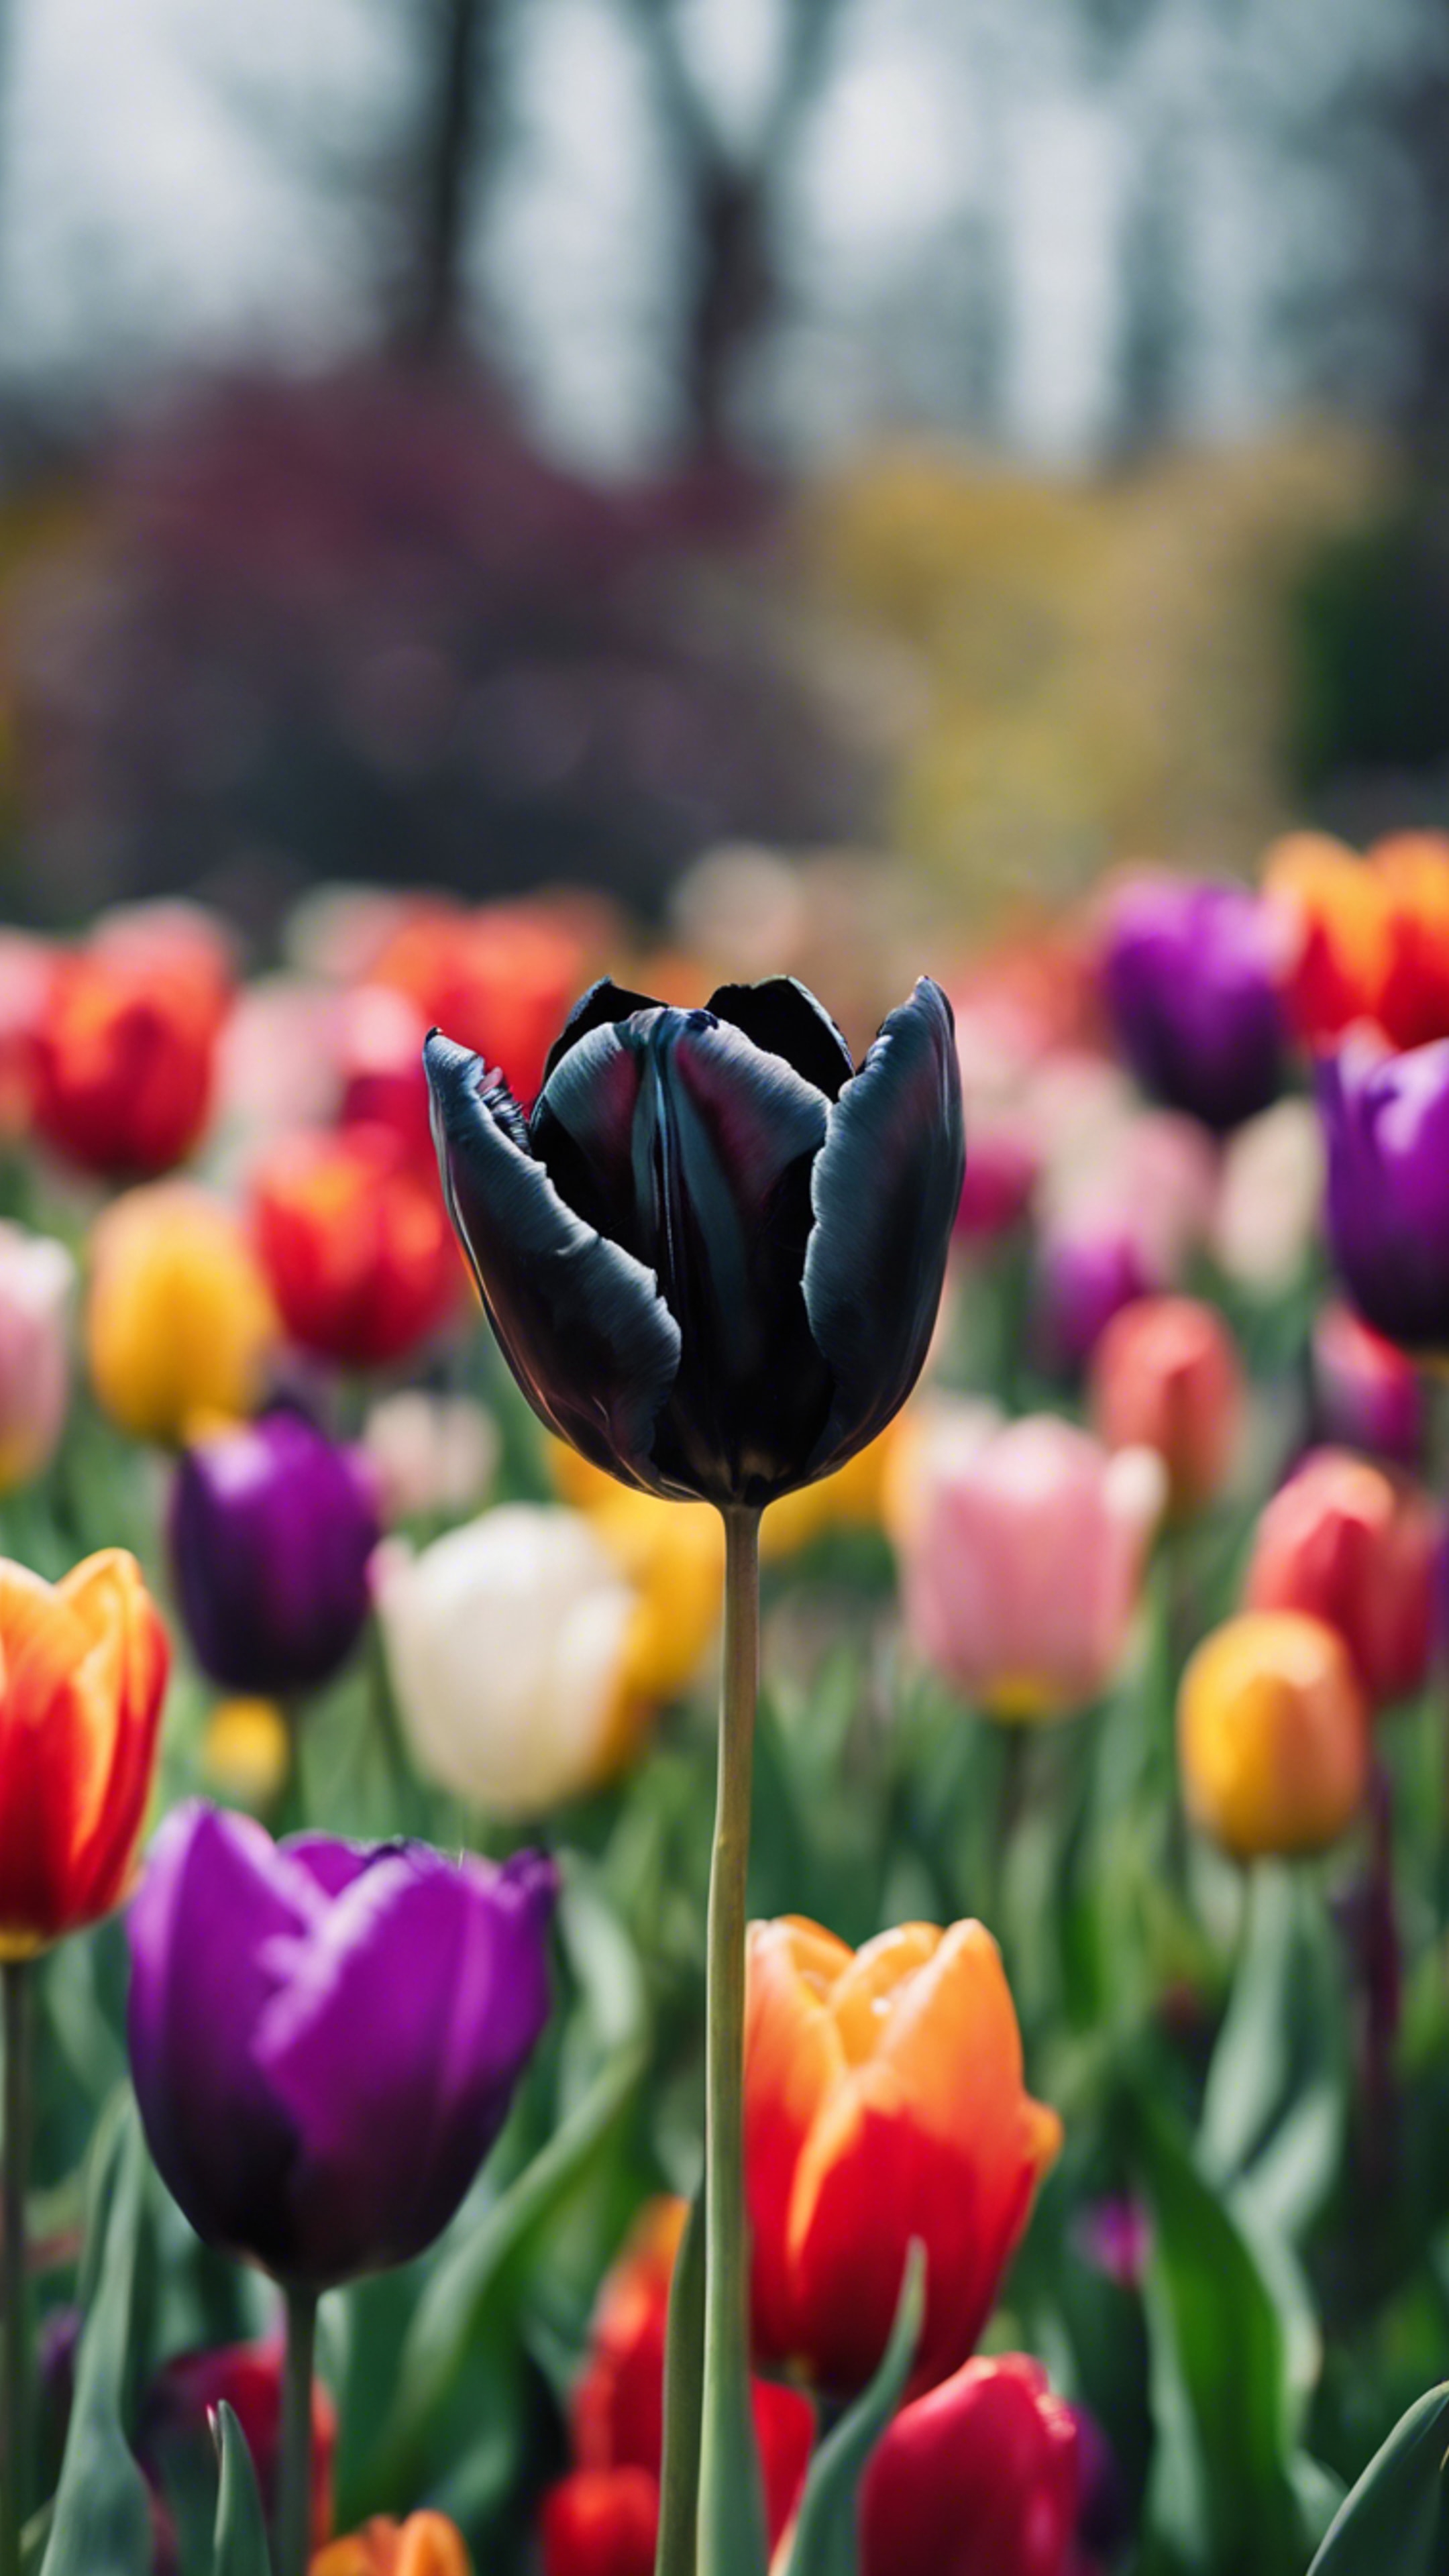 A delicate black tulip, standing out dramatically among a vibrant spray of multicolored tulips in a spring garden. 벽지[60dfa6a8a46243228945]